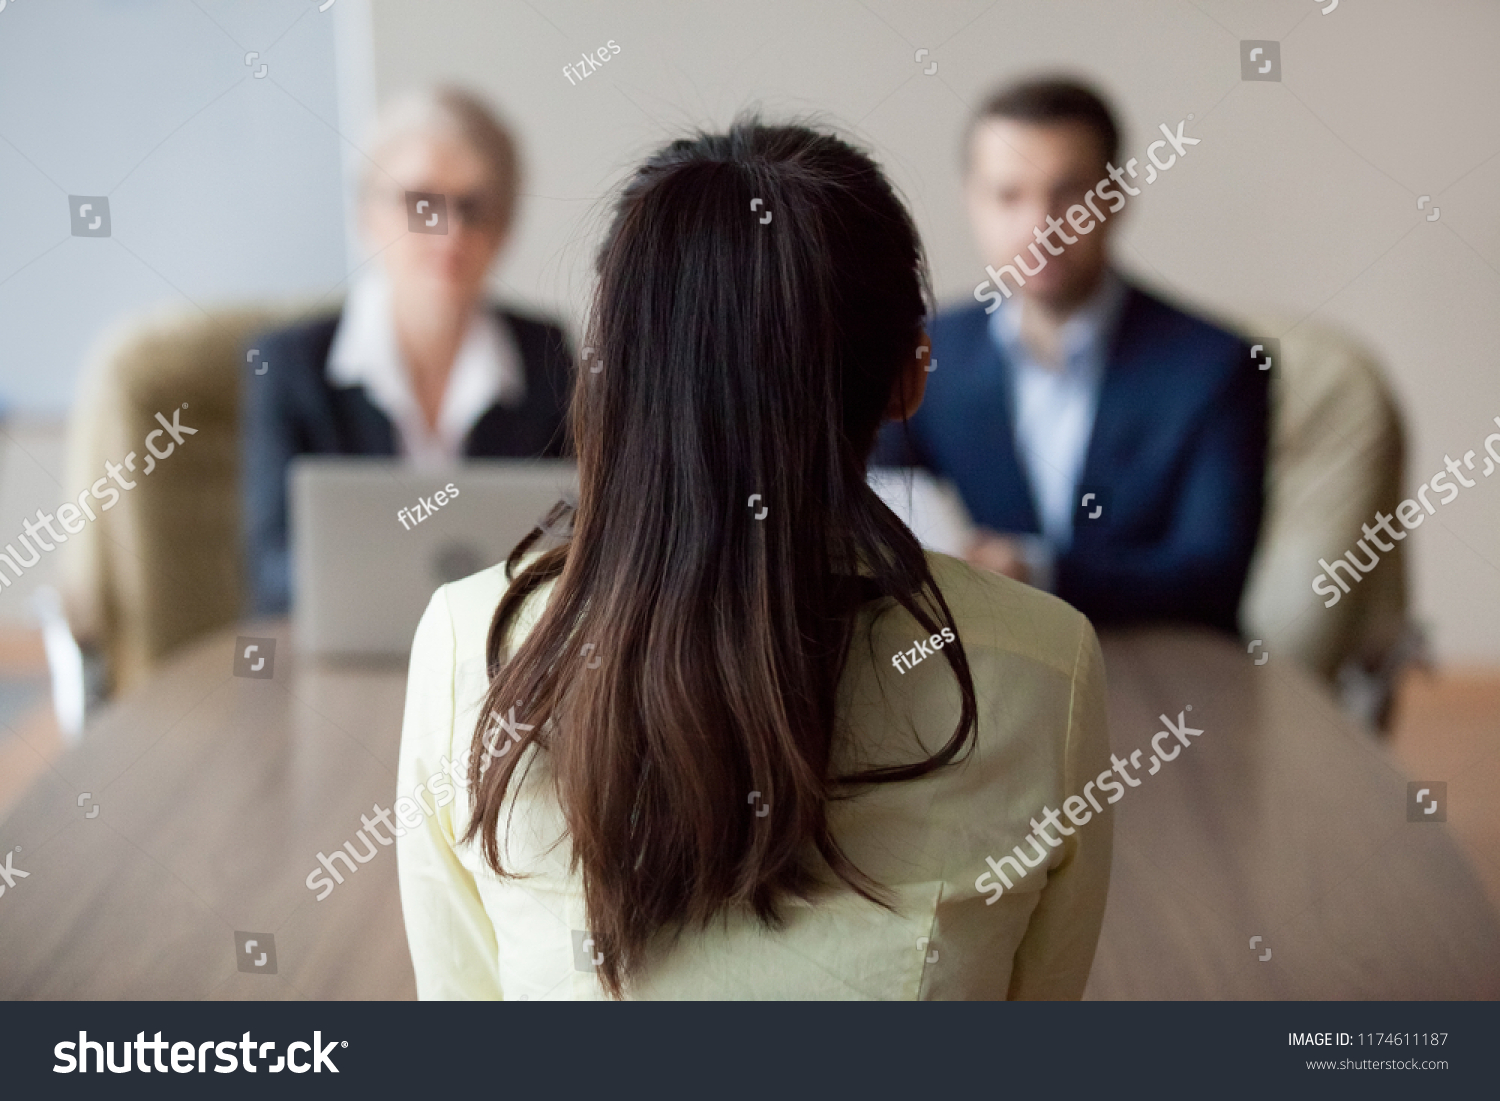 Businesswoman and businessman HR manager interviewing woman. Candidate female sitting her back to camera, focus on her, close up rear view, interviewers on background. Human resources, hiring concept #1174611187